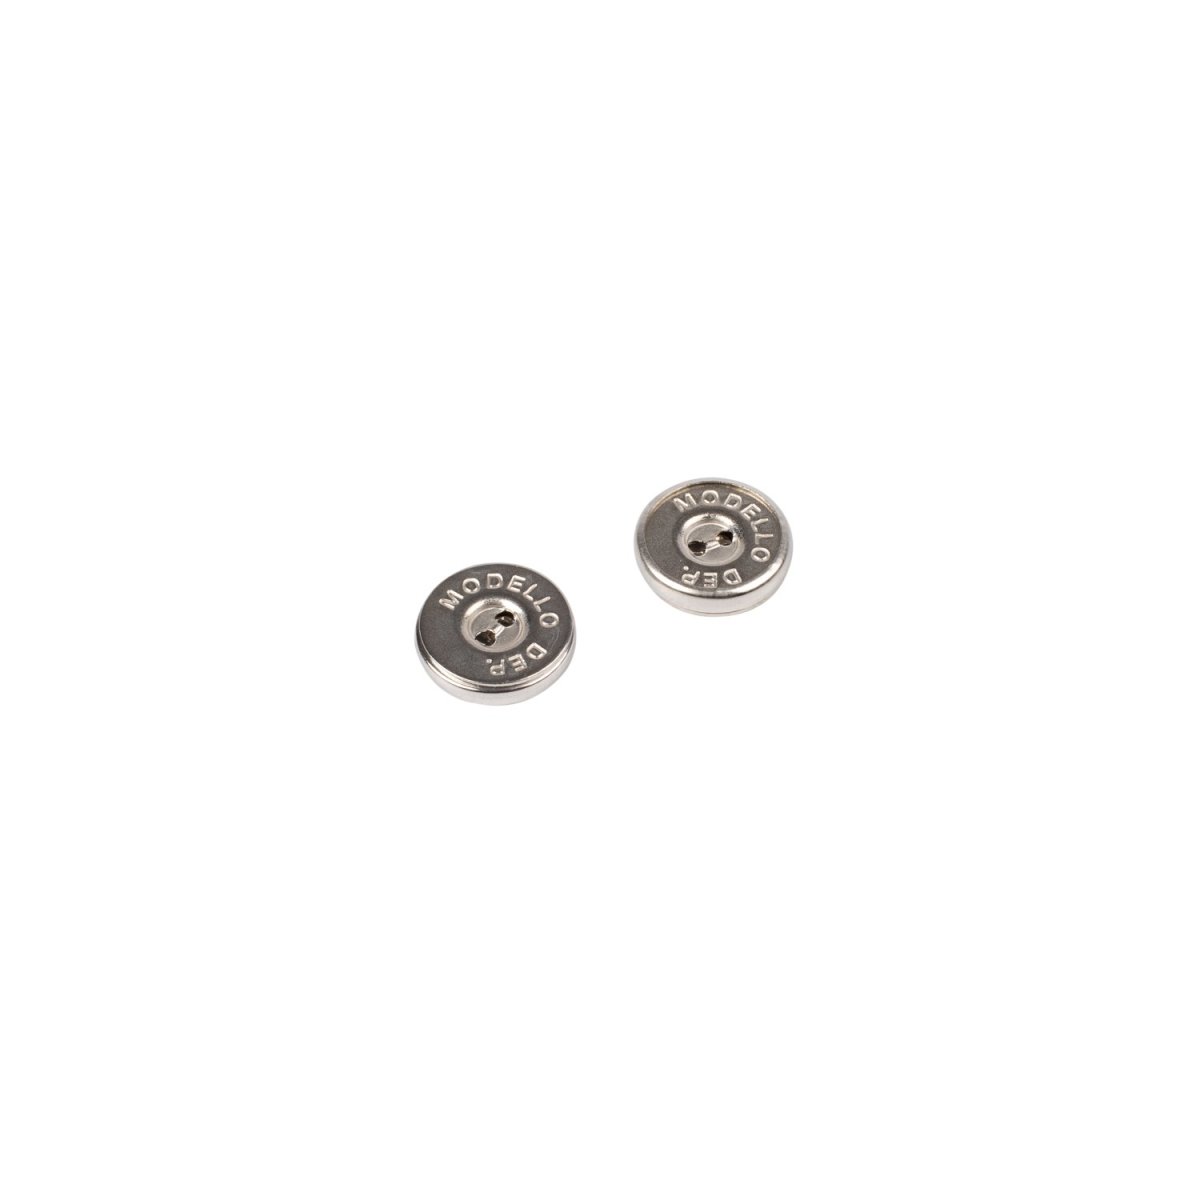 Blister-pack of 2 silvery 18 mm sewing magnetic snaps | BOHIN France